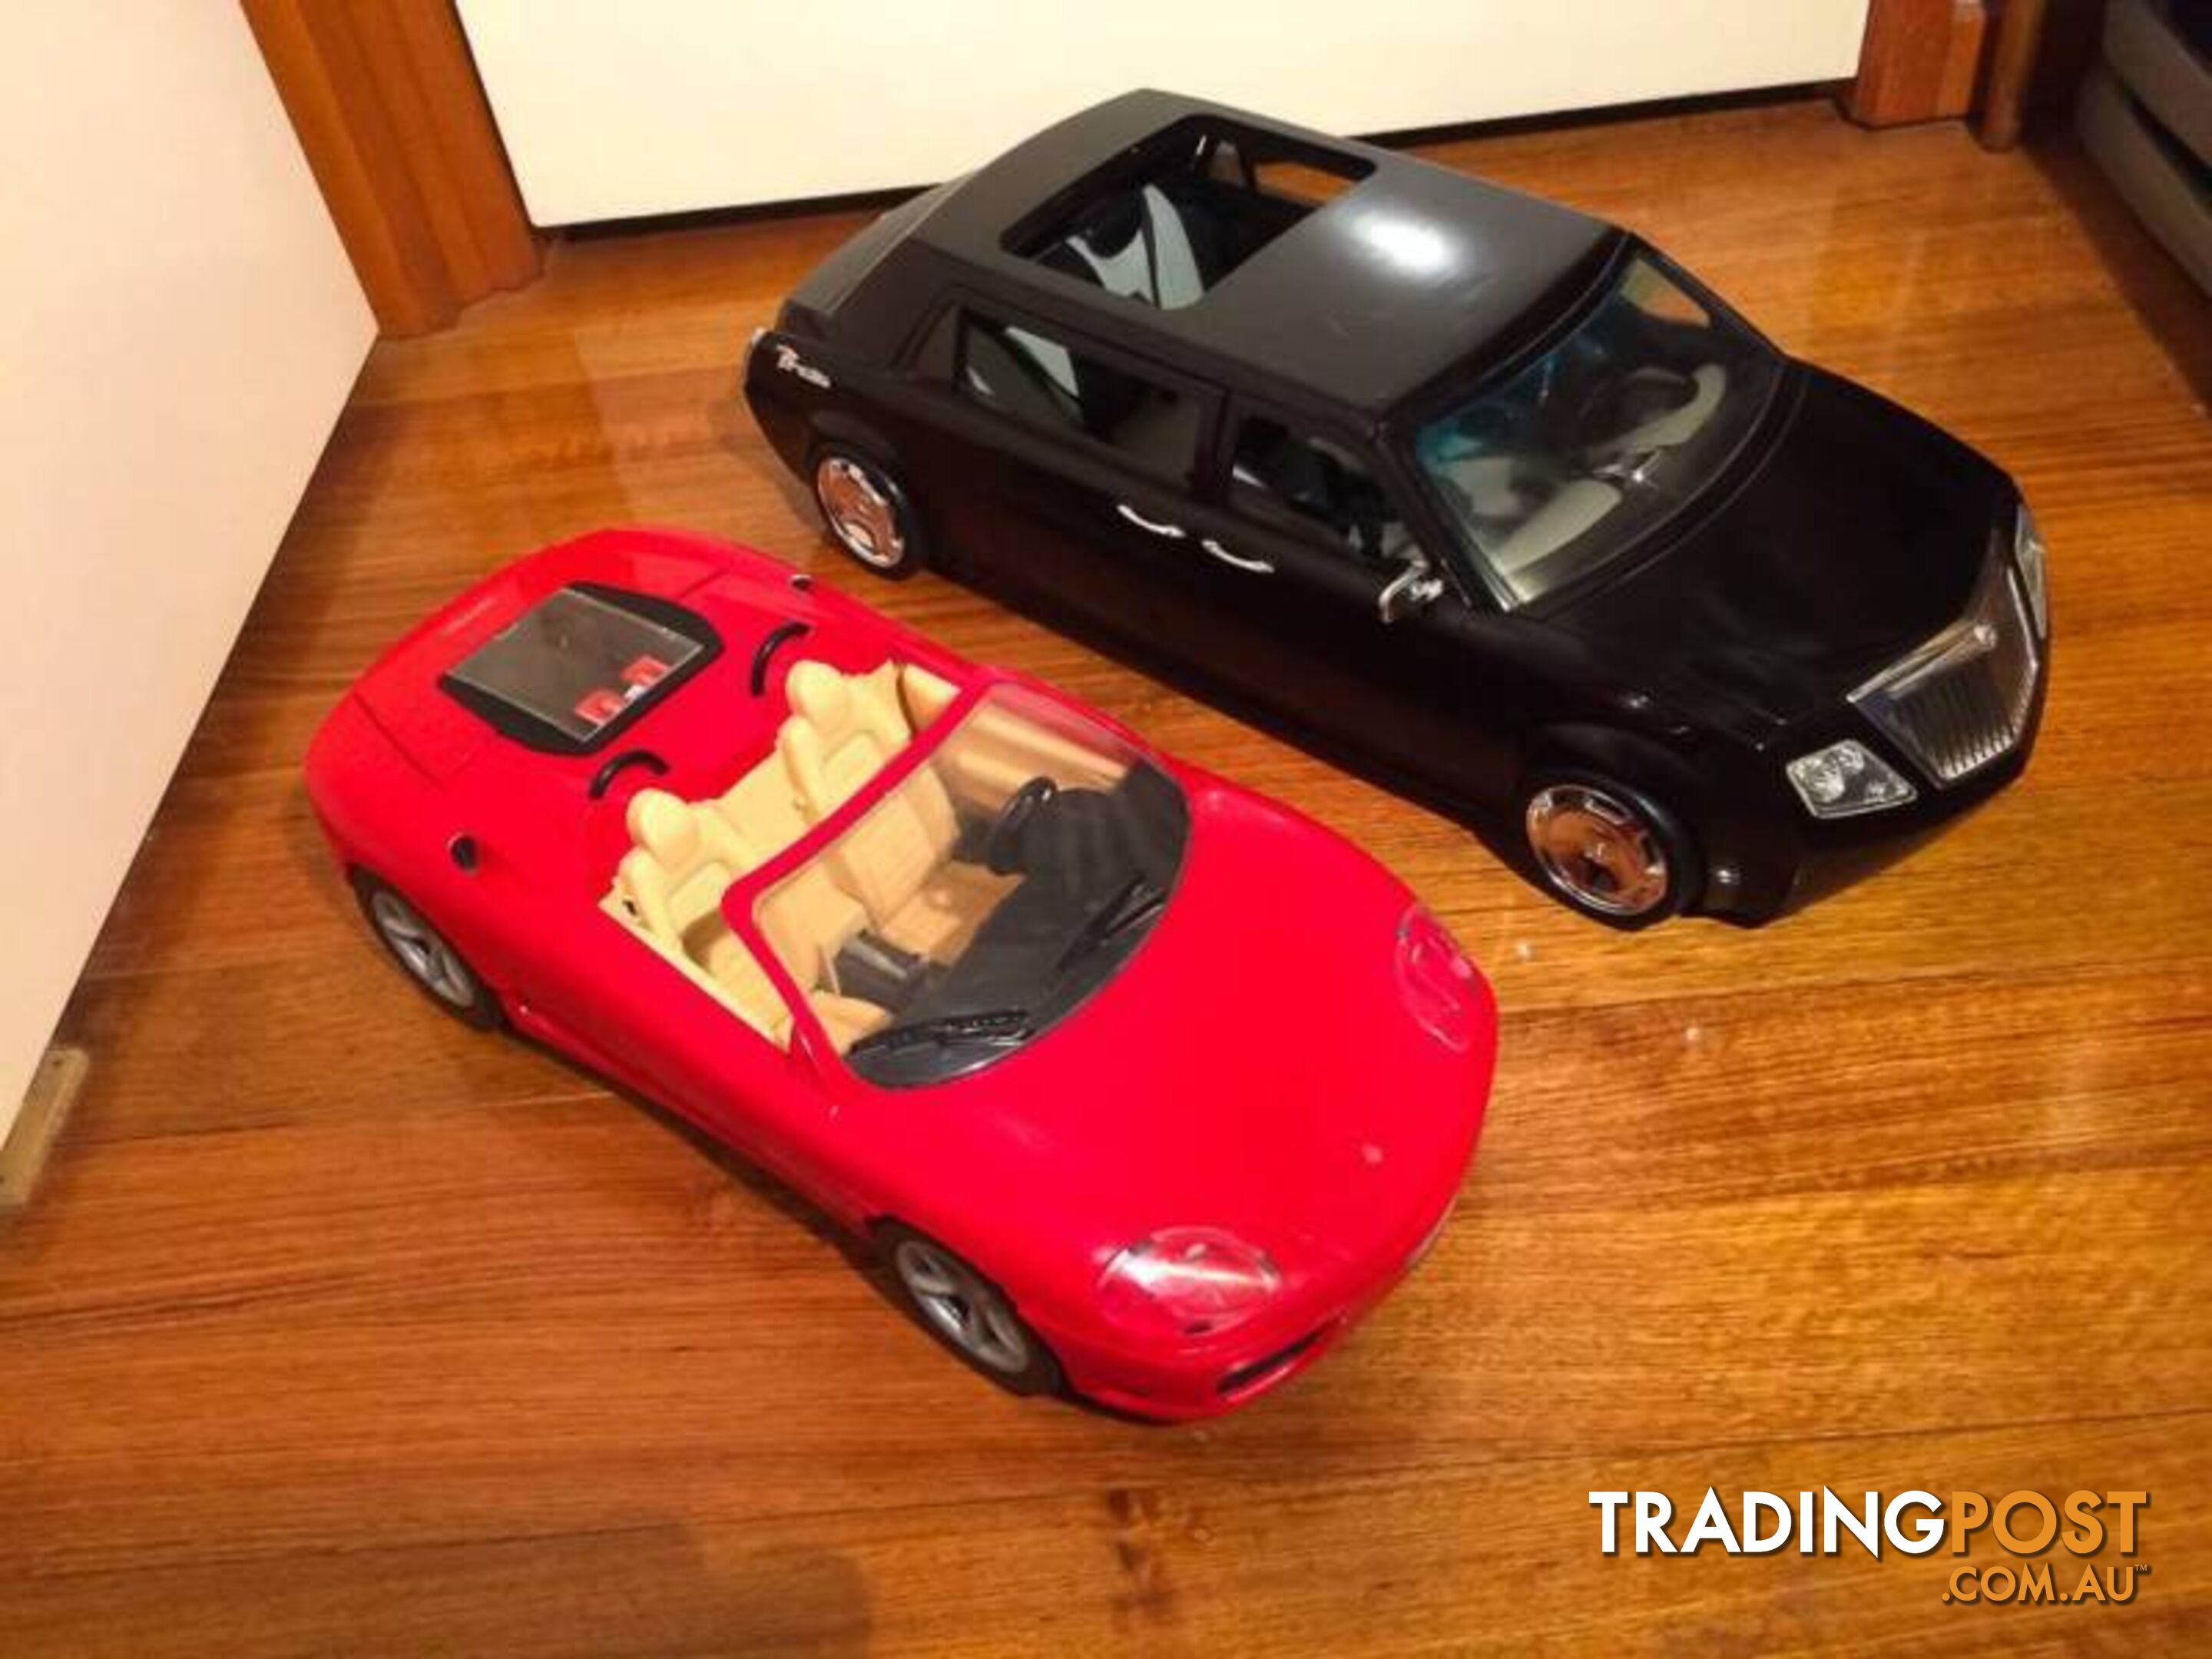 2 VERY LARGE TOY CARS $20 FOR THE PAIR